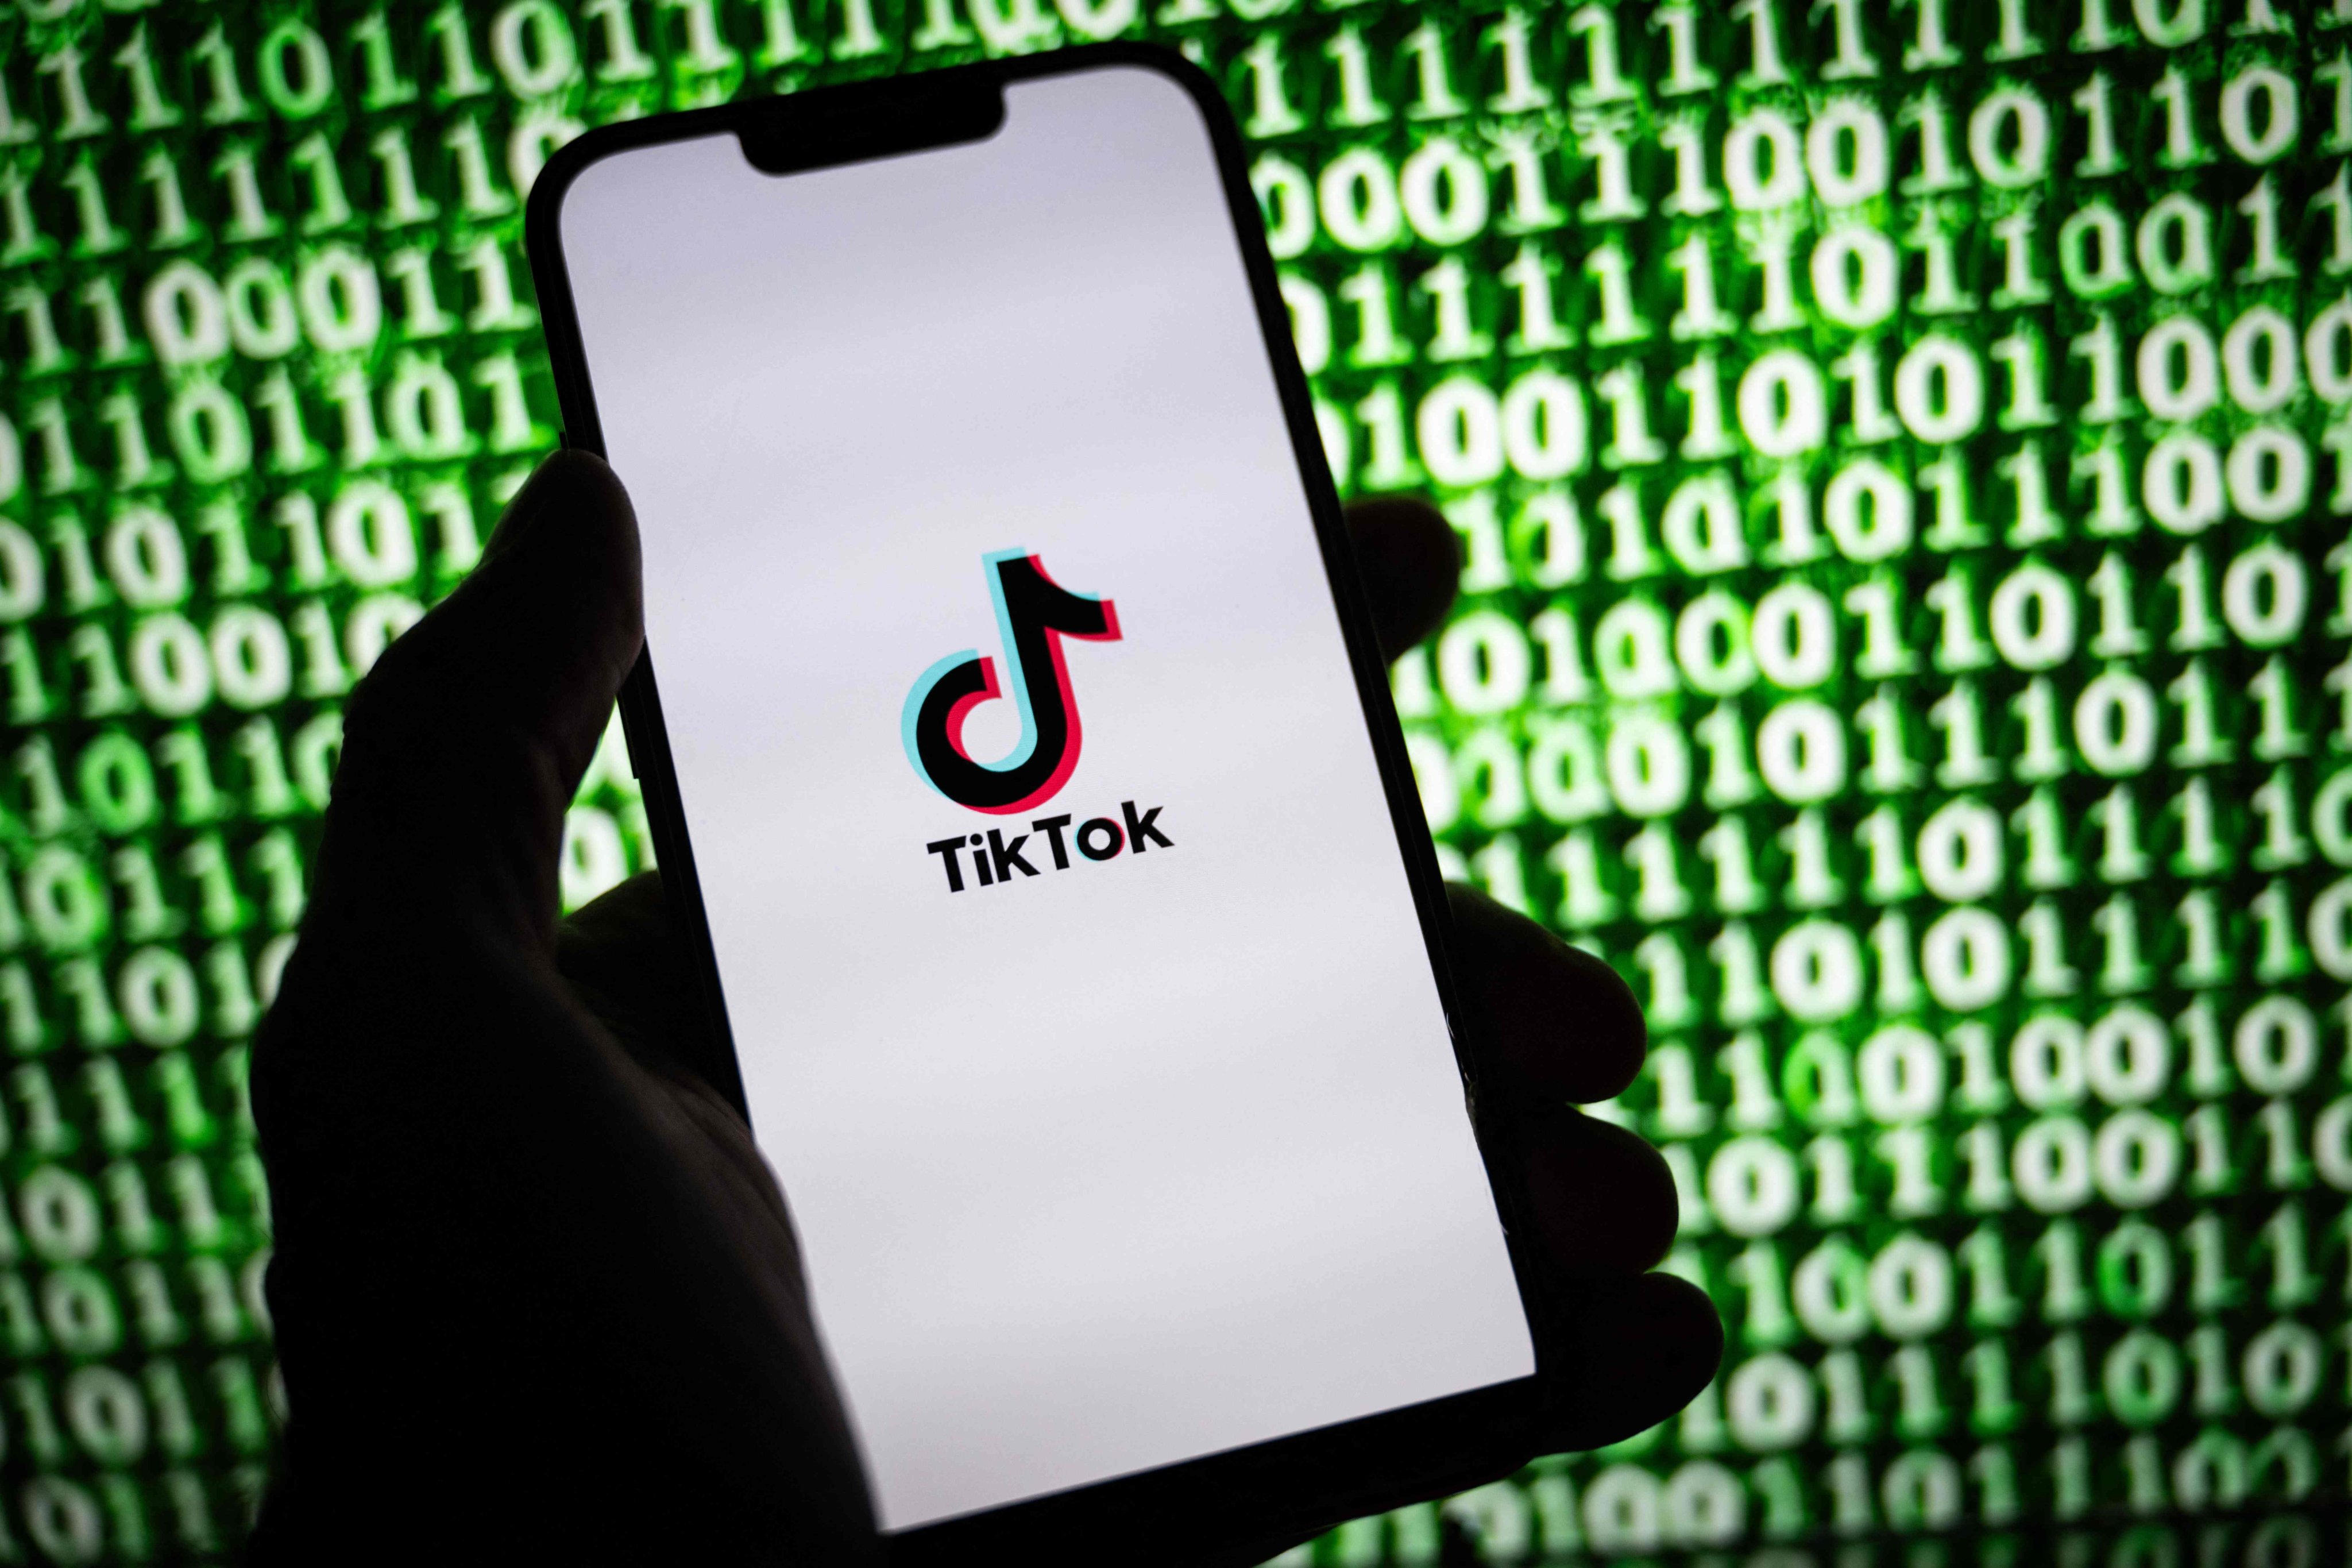 The logo of TikTok is displayed on a smartphone in this illustration taken on October 30, 2023. Photo: AFP